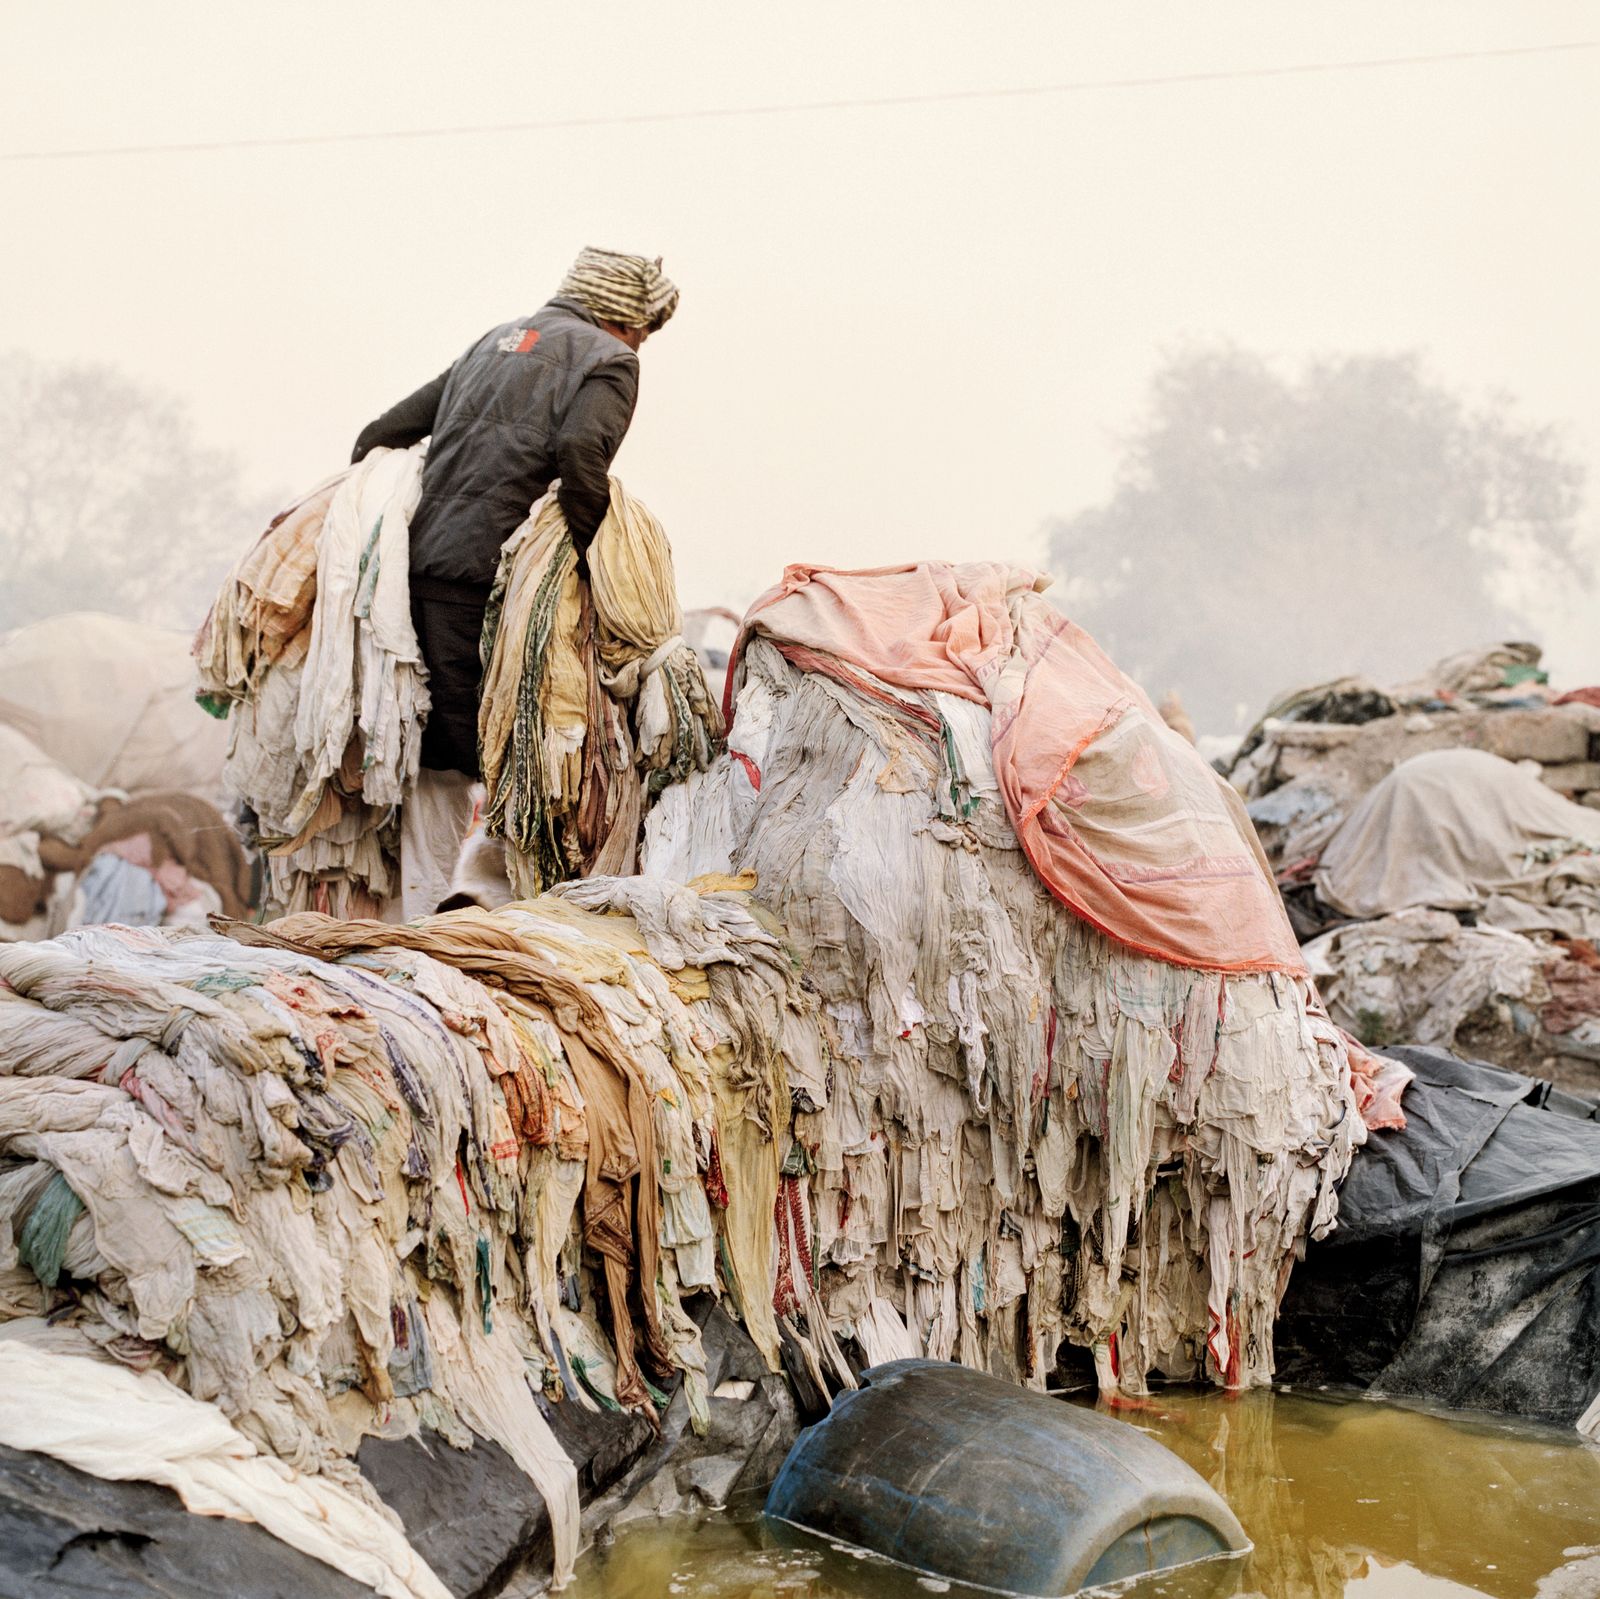 © Giulio Di Sturco - an outdoor makshift laundry for hotels along the Yamuna river, feb 2014